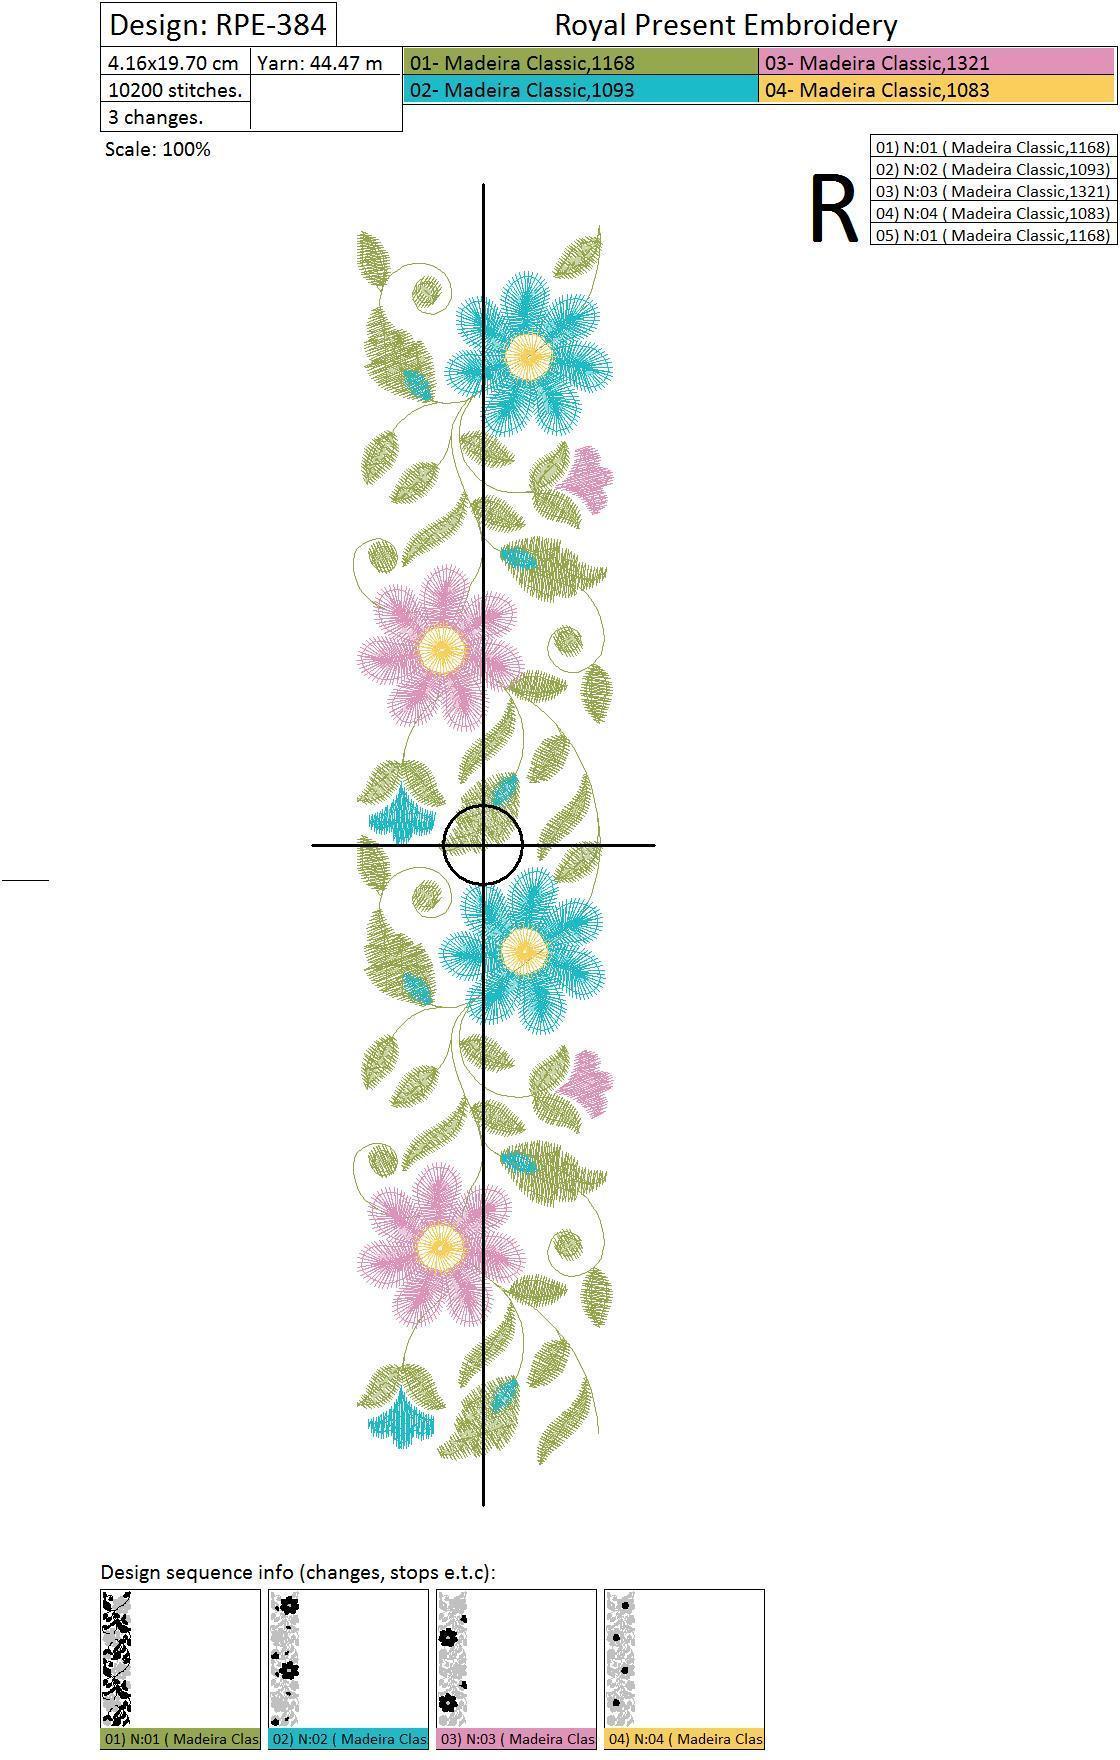 Download a Free Border Machine Embroidery Design Today